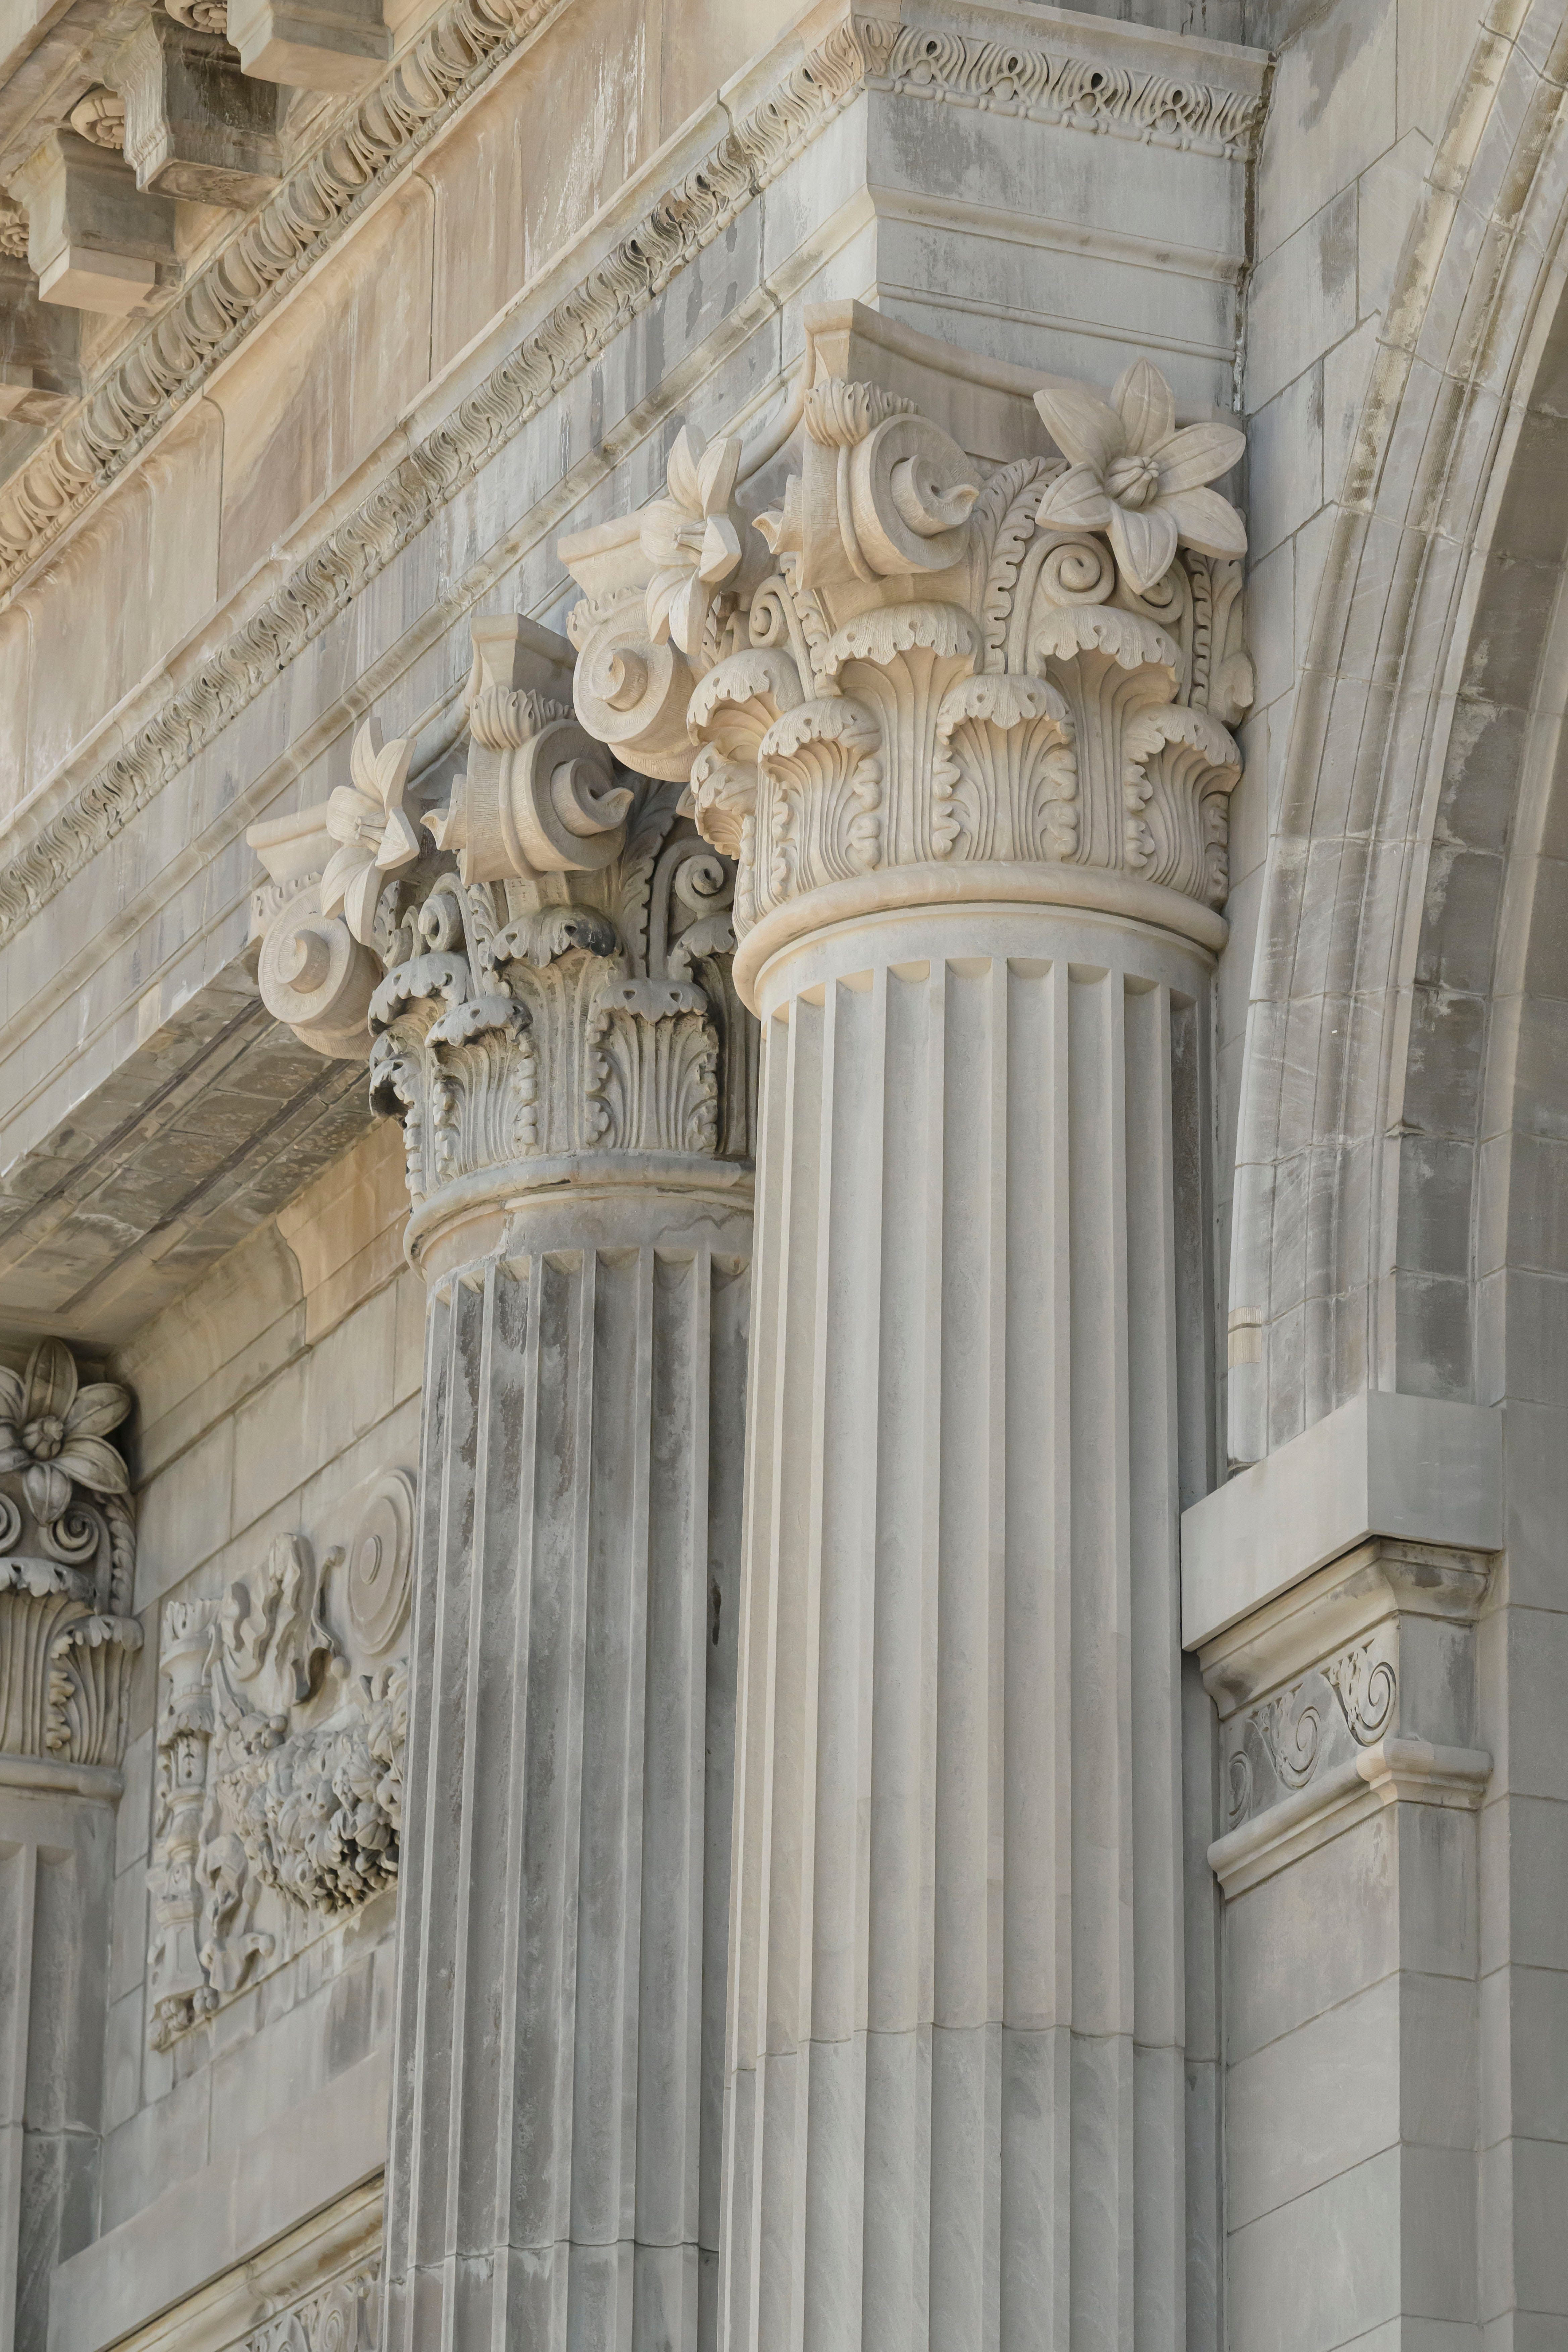 An original column and a hand carved new column next to each other can be seen on the renovated exterior of the Michigan Central Station.